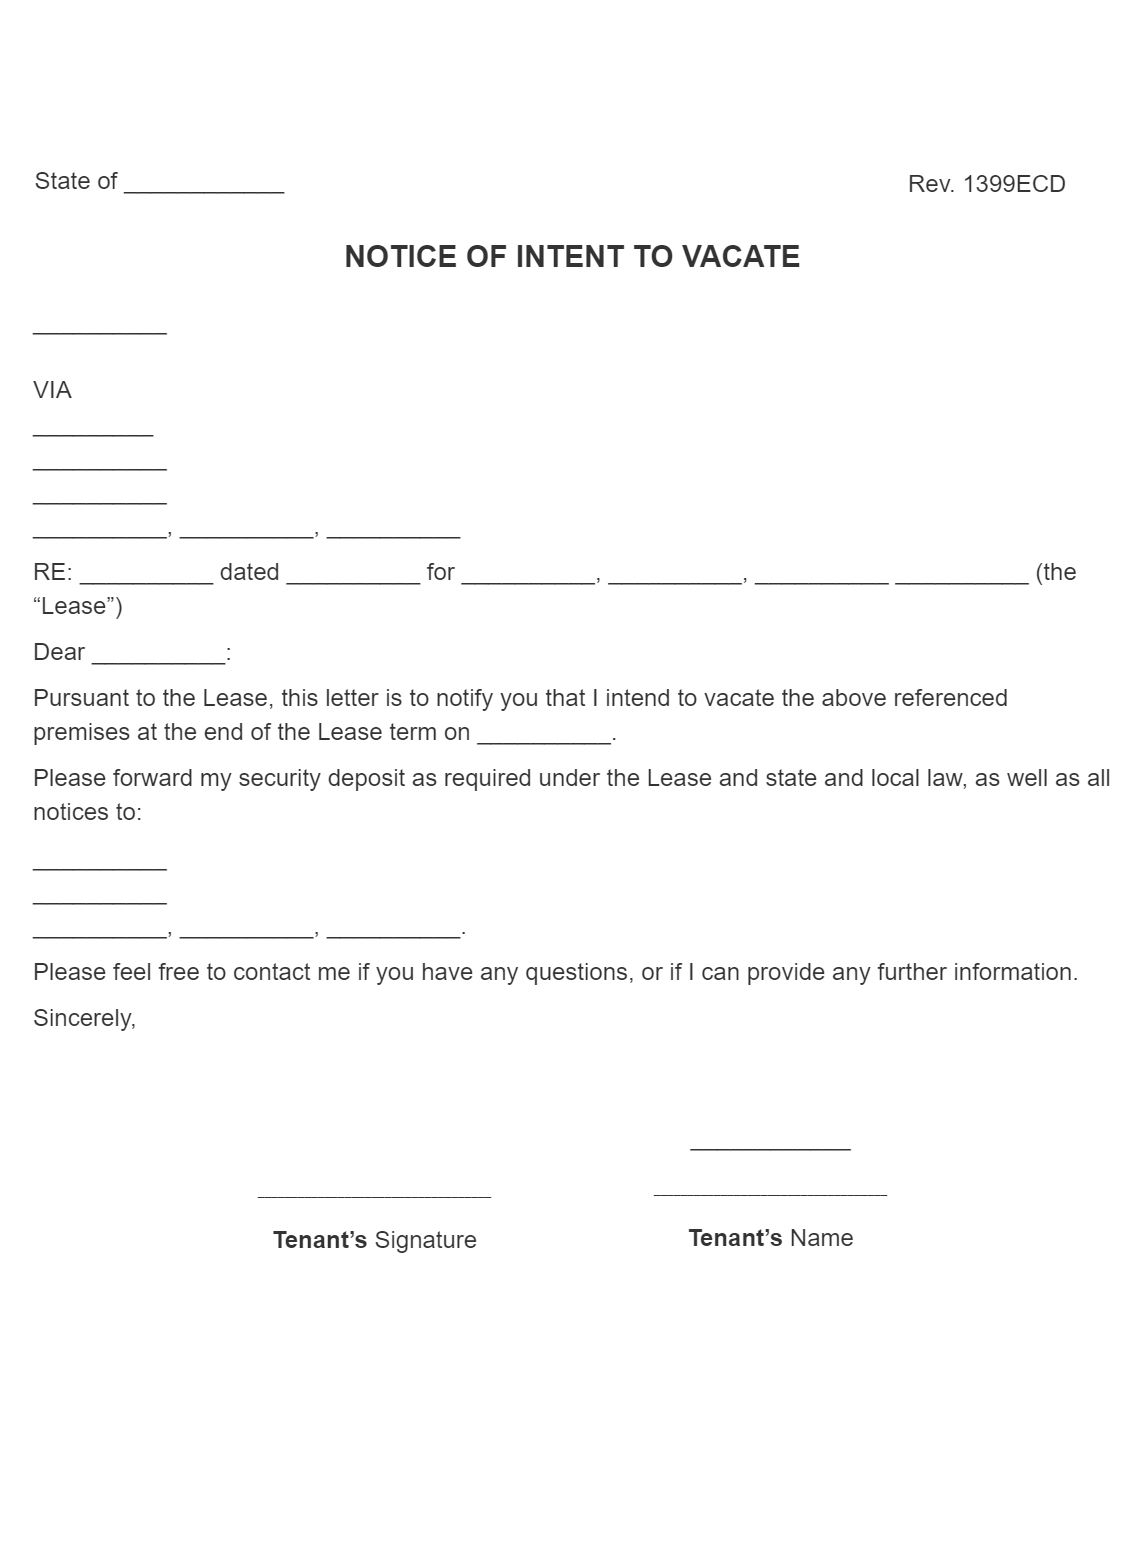 notice-of-intent-to-vacate